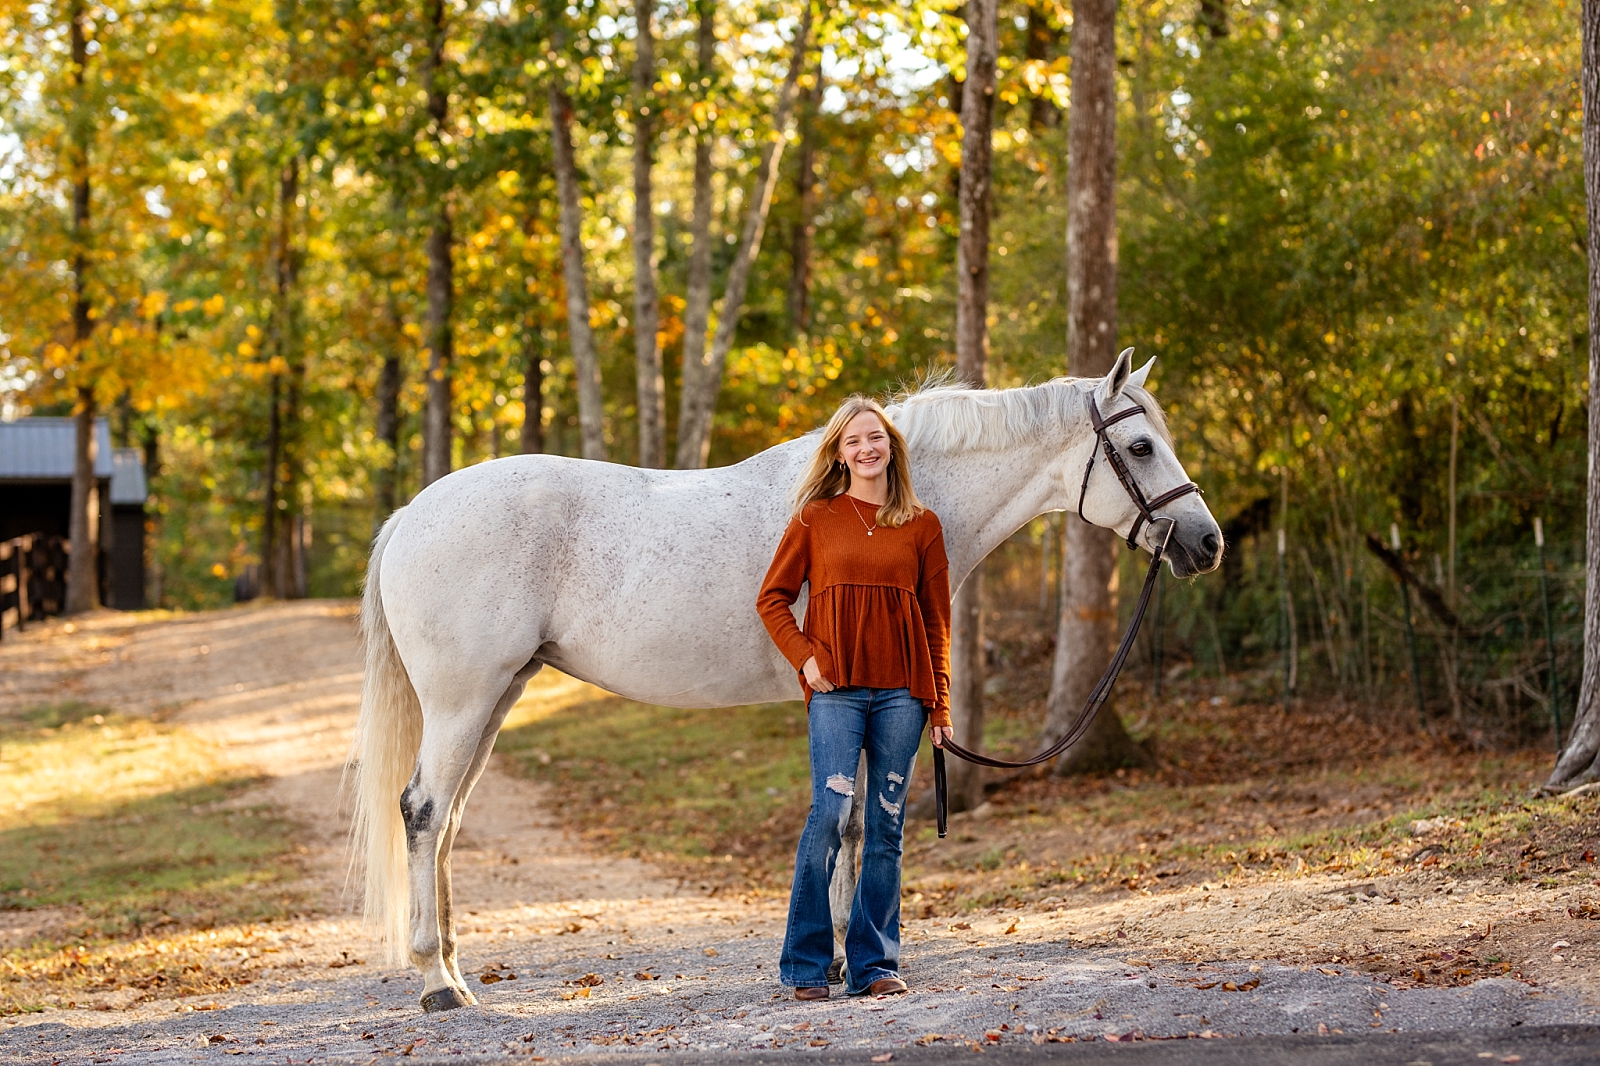 North Alabama horse photographer. Photos of horses in the fall. Equestrian. High school senior with her horse.